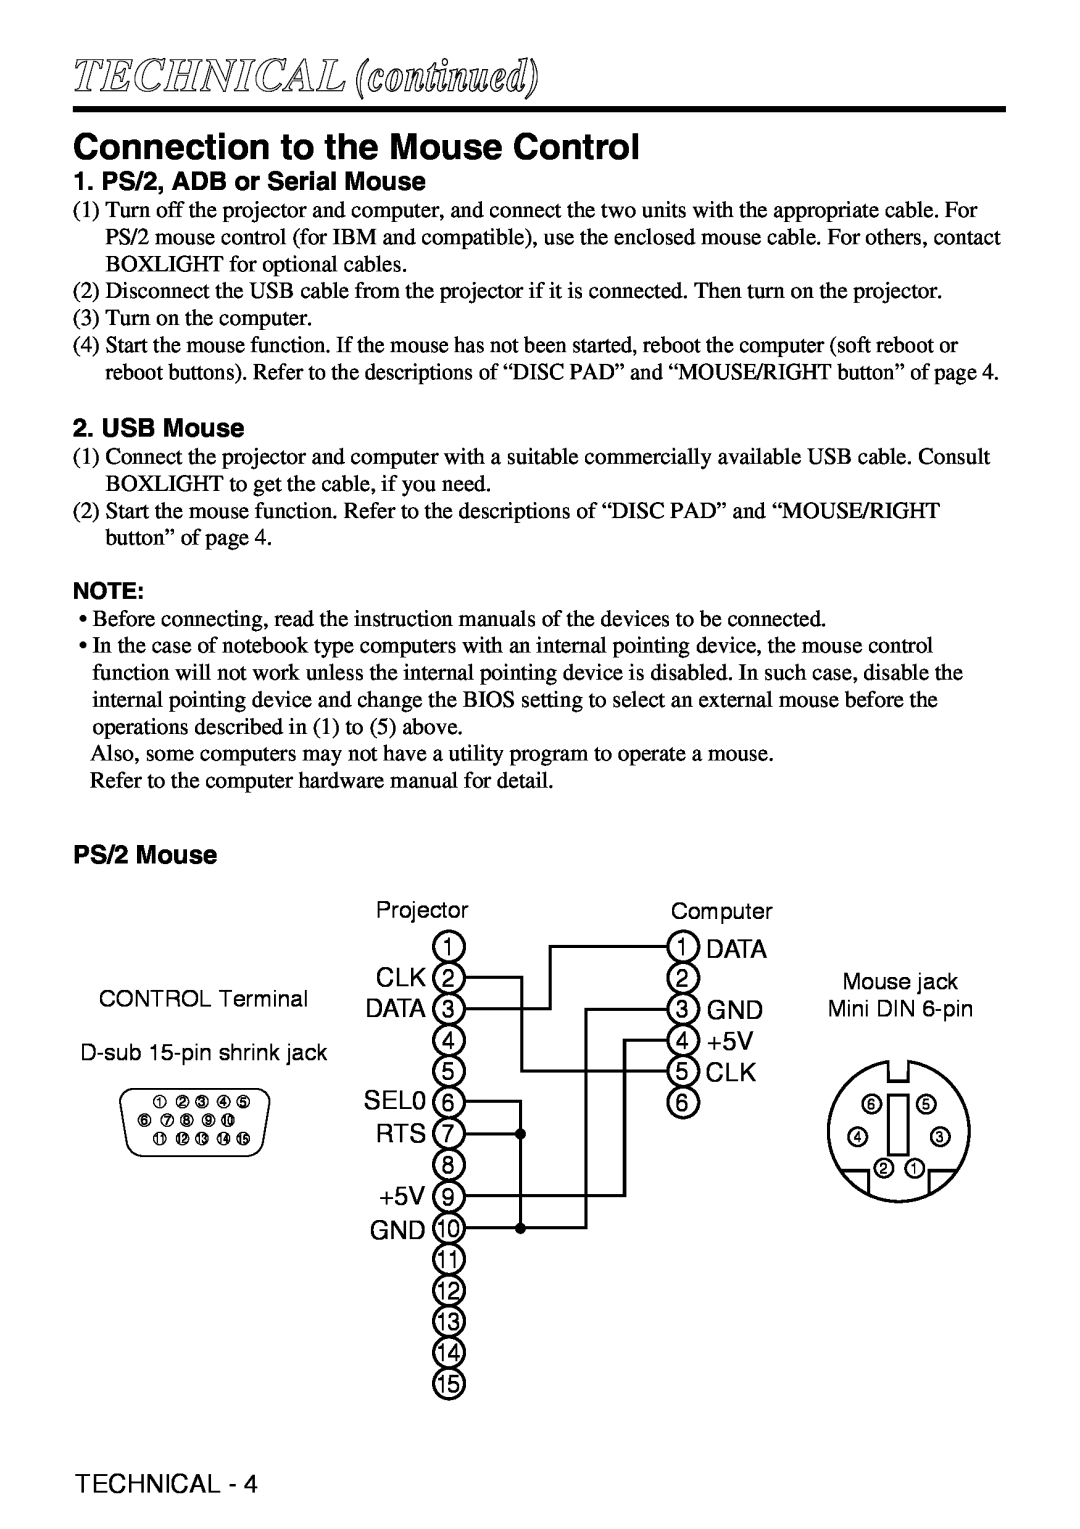 Grundig CP-731i Connection to the Mouse Control, 1. PS/2, ADB or Serial Mouse, USB Mouse, PS/2 Mouse, TECHNICAL continued 